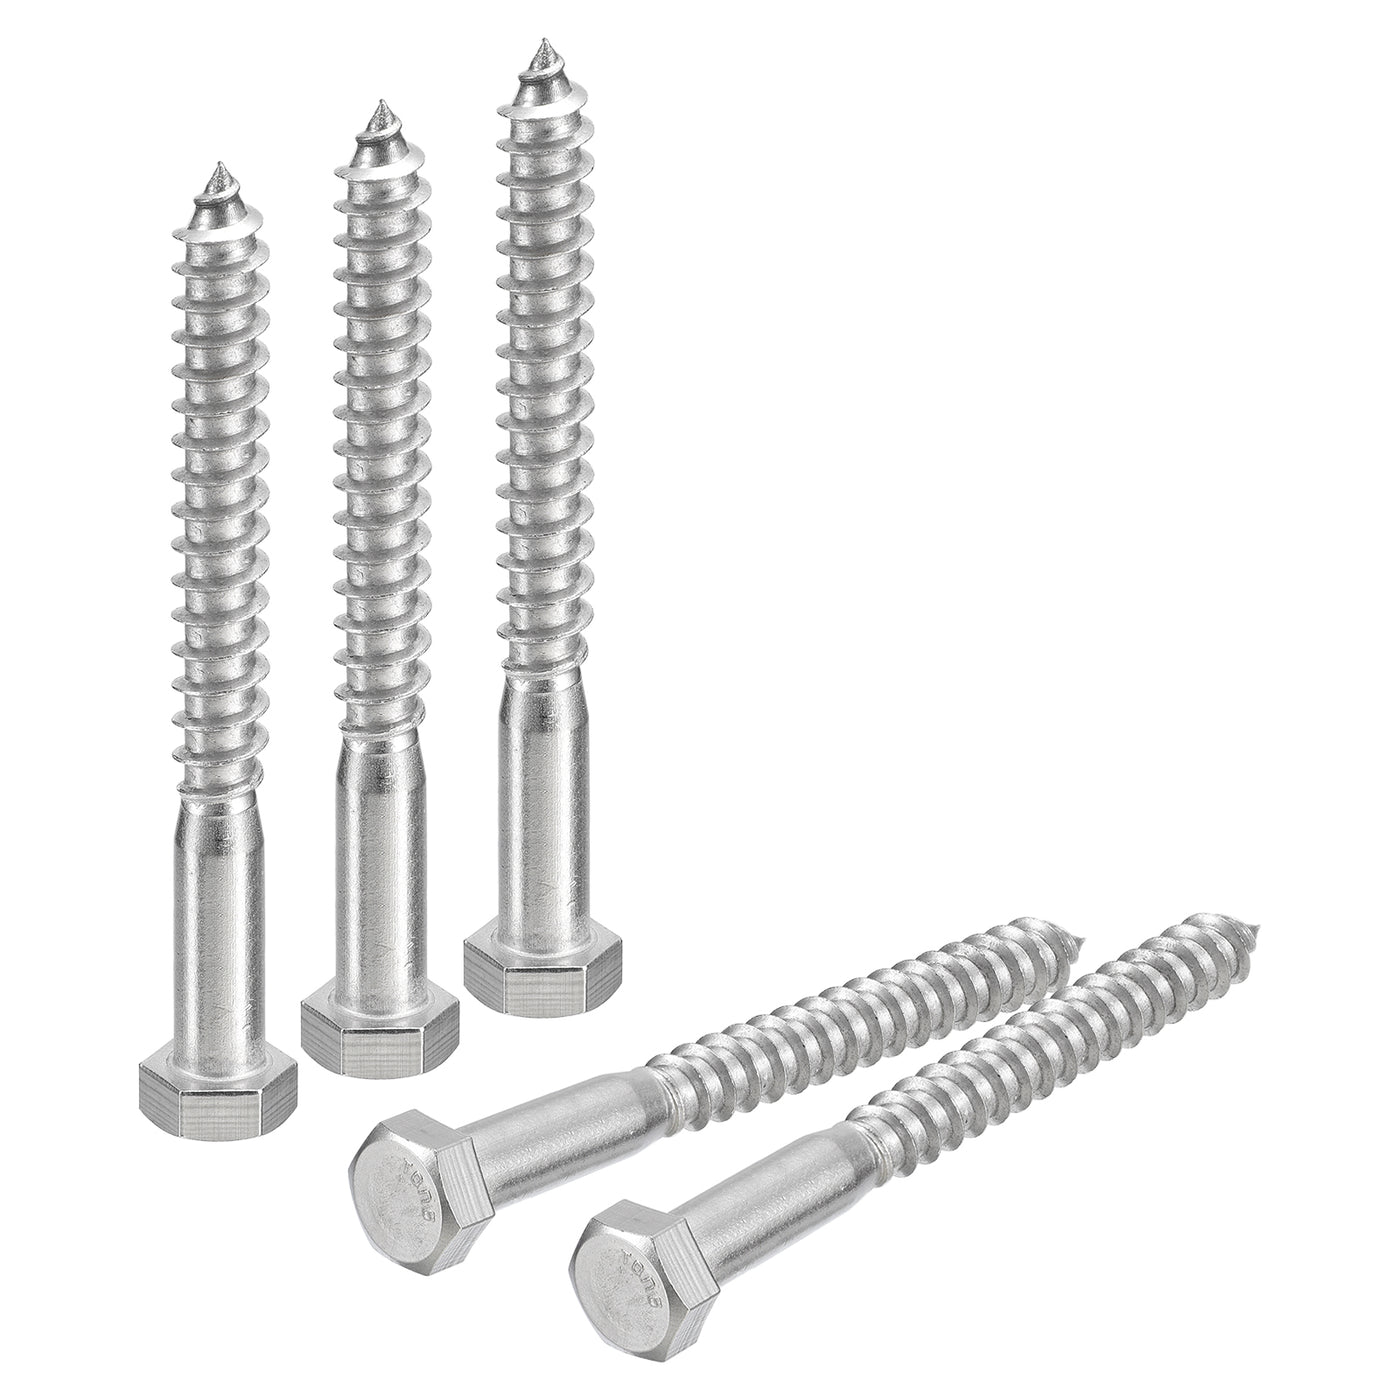 uxcell Uxcell Hex Head Lag Screws Bolts, 5pcs 3/8" x 4" 304 Stainless Steel Wood Screws